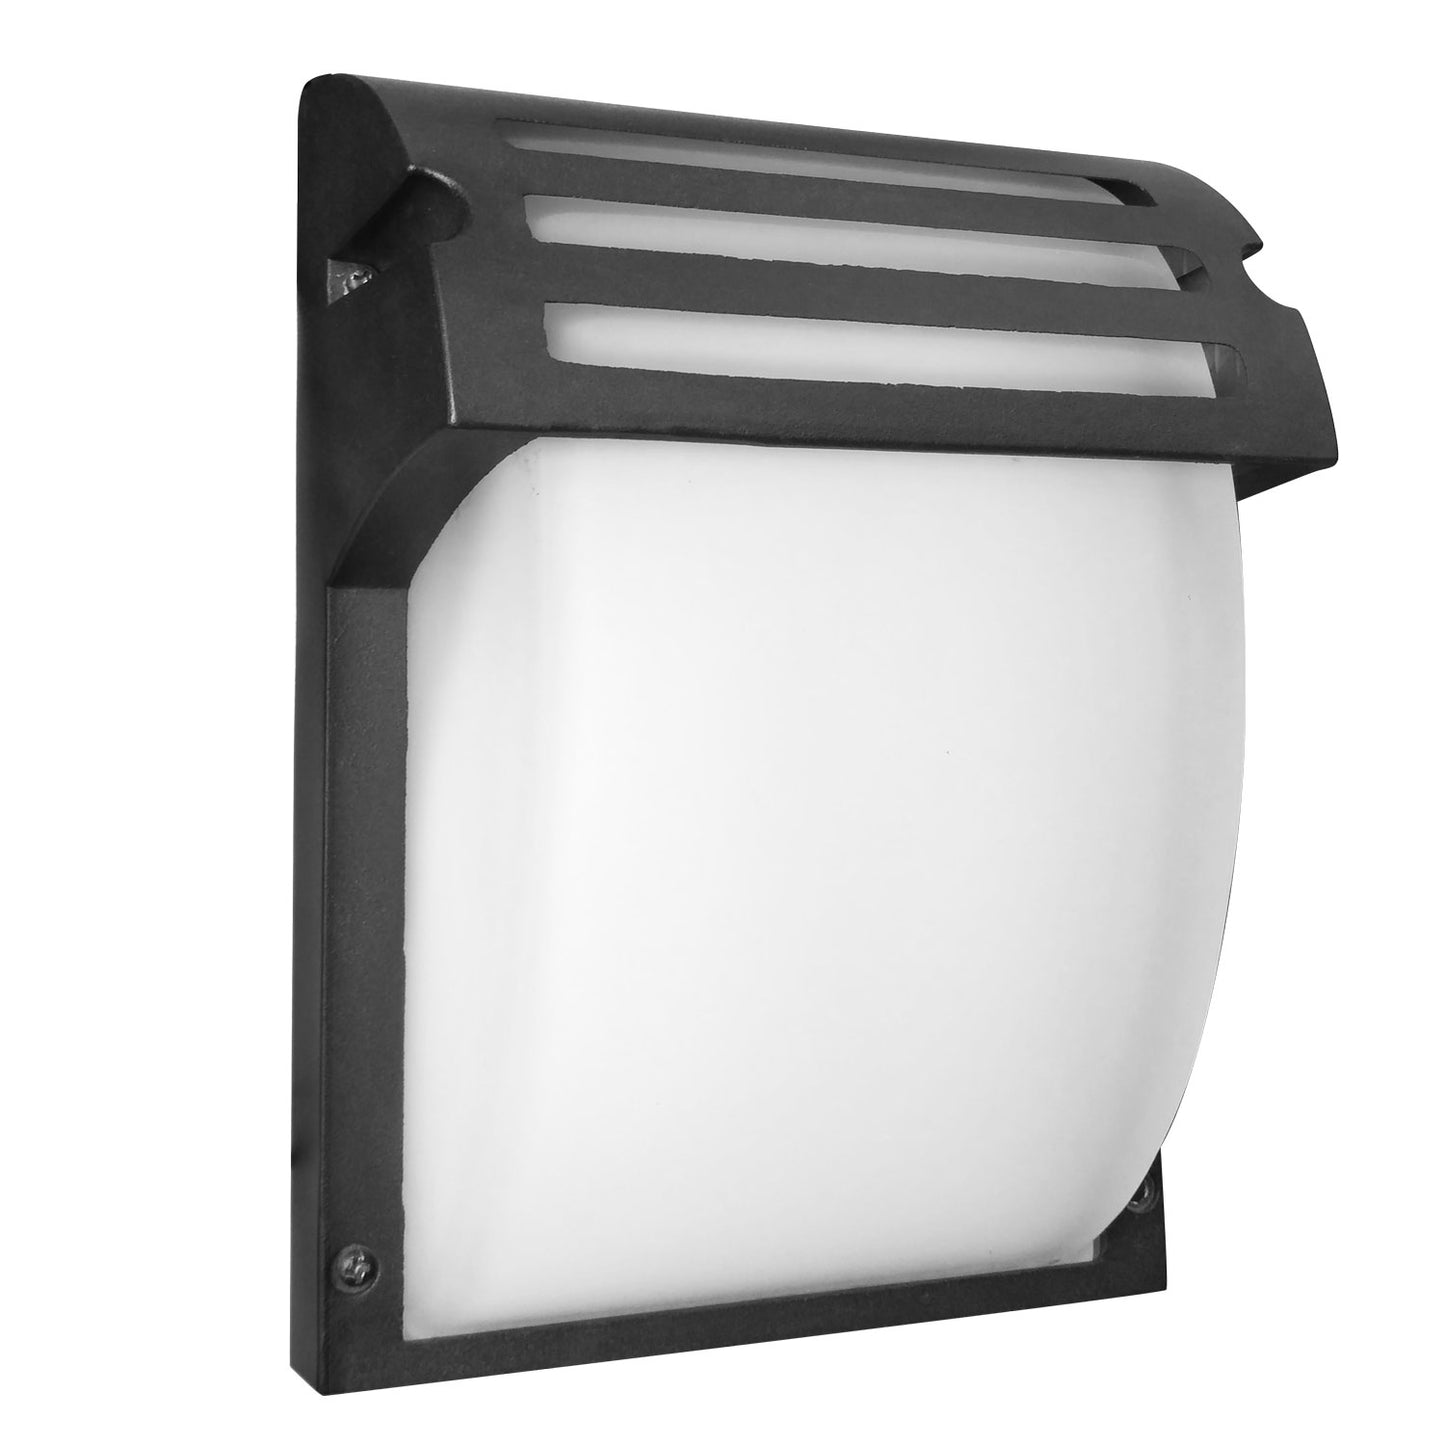 Sunlite 88688-SU Tunable LED Modern Style Outdoor Light Fixture, 9 Watts (60W Equivalent), 600 Lumens, Black Finish, Frosted Glass Lens, Color Temperature Tunable 3000K/4000K/5000K